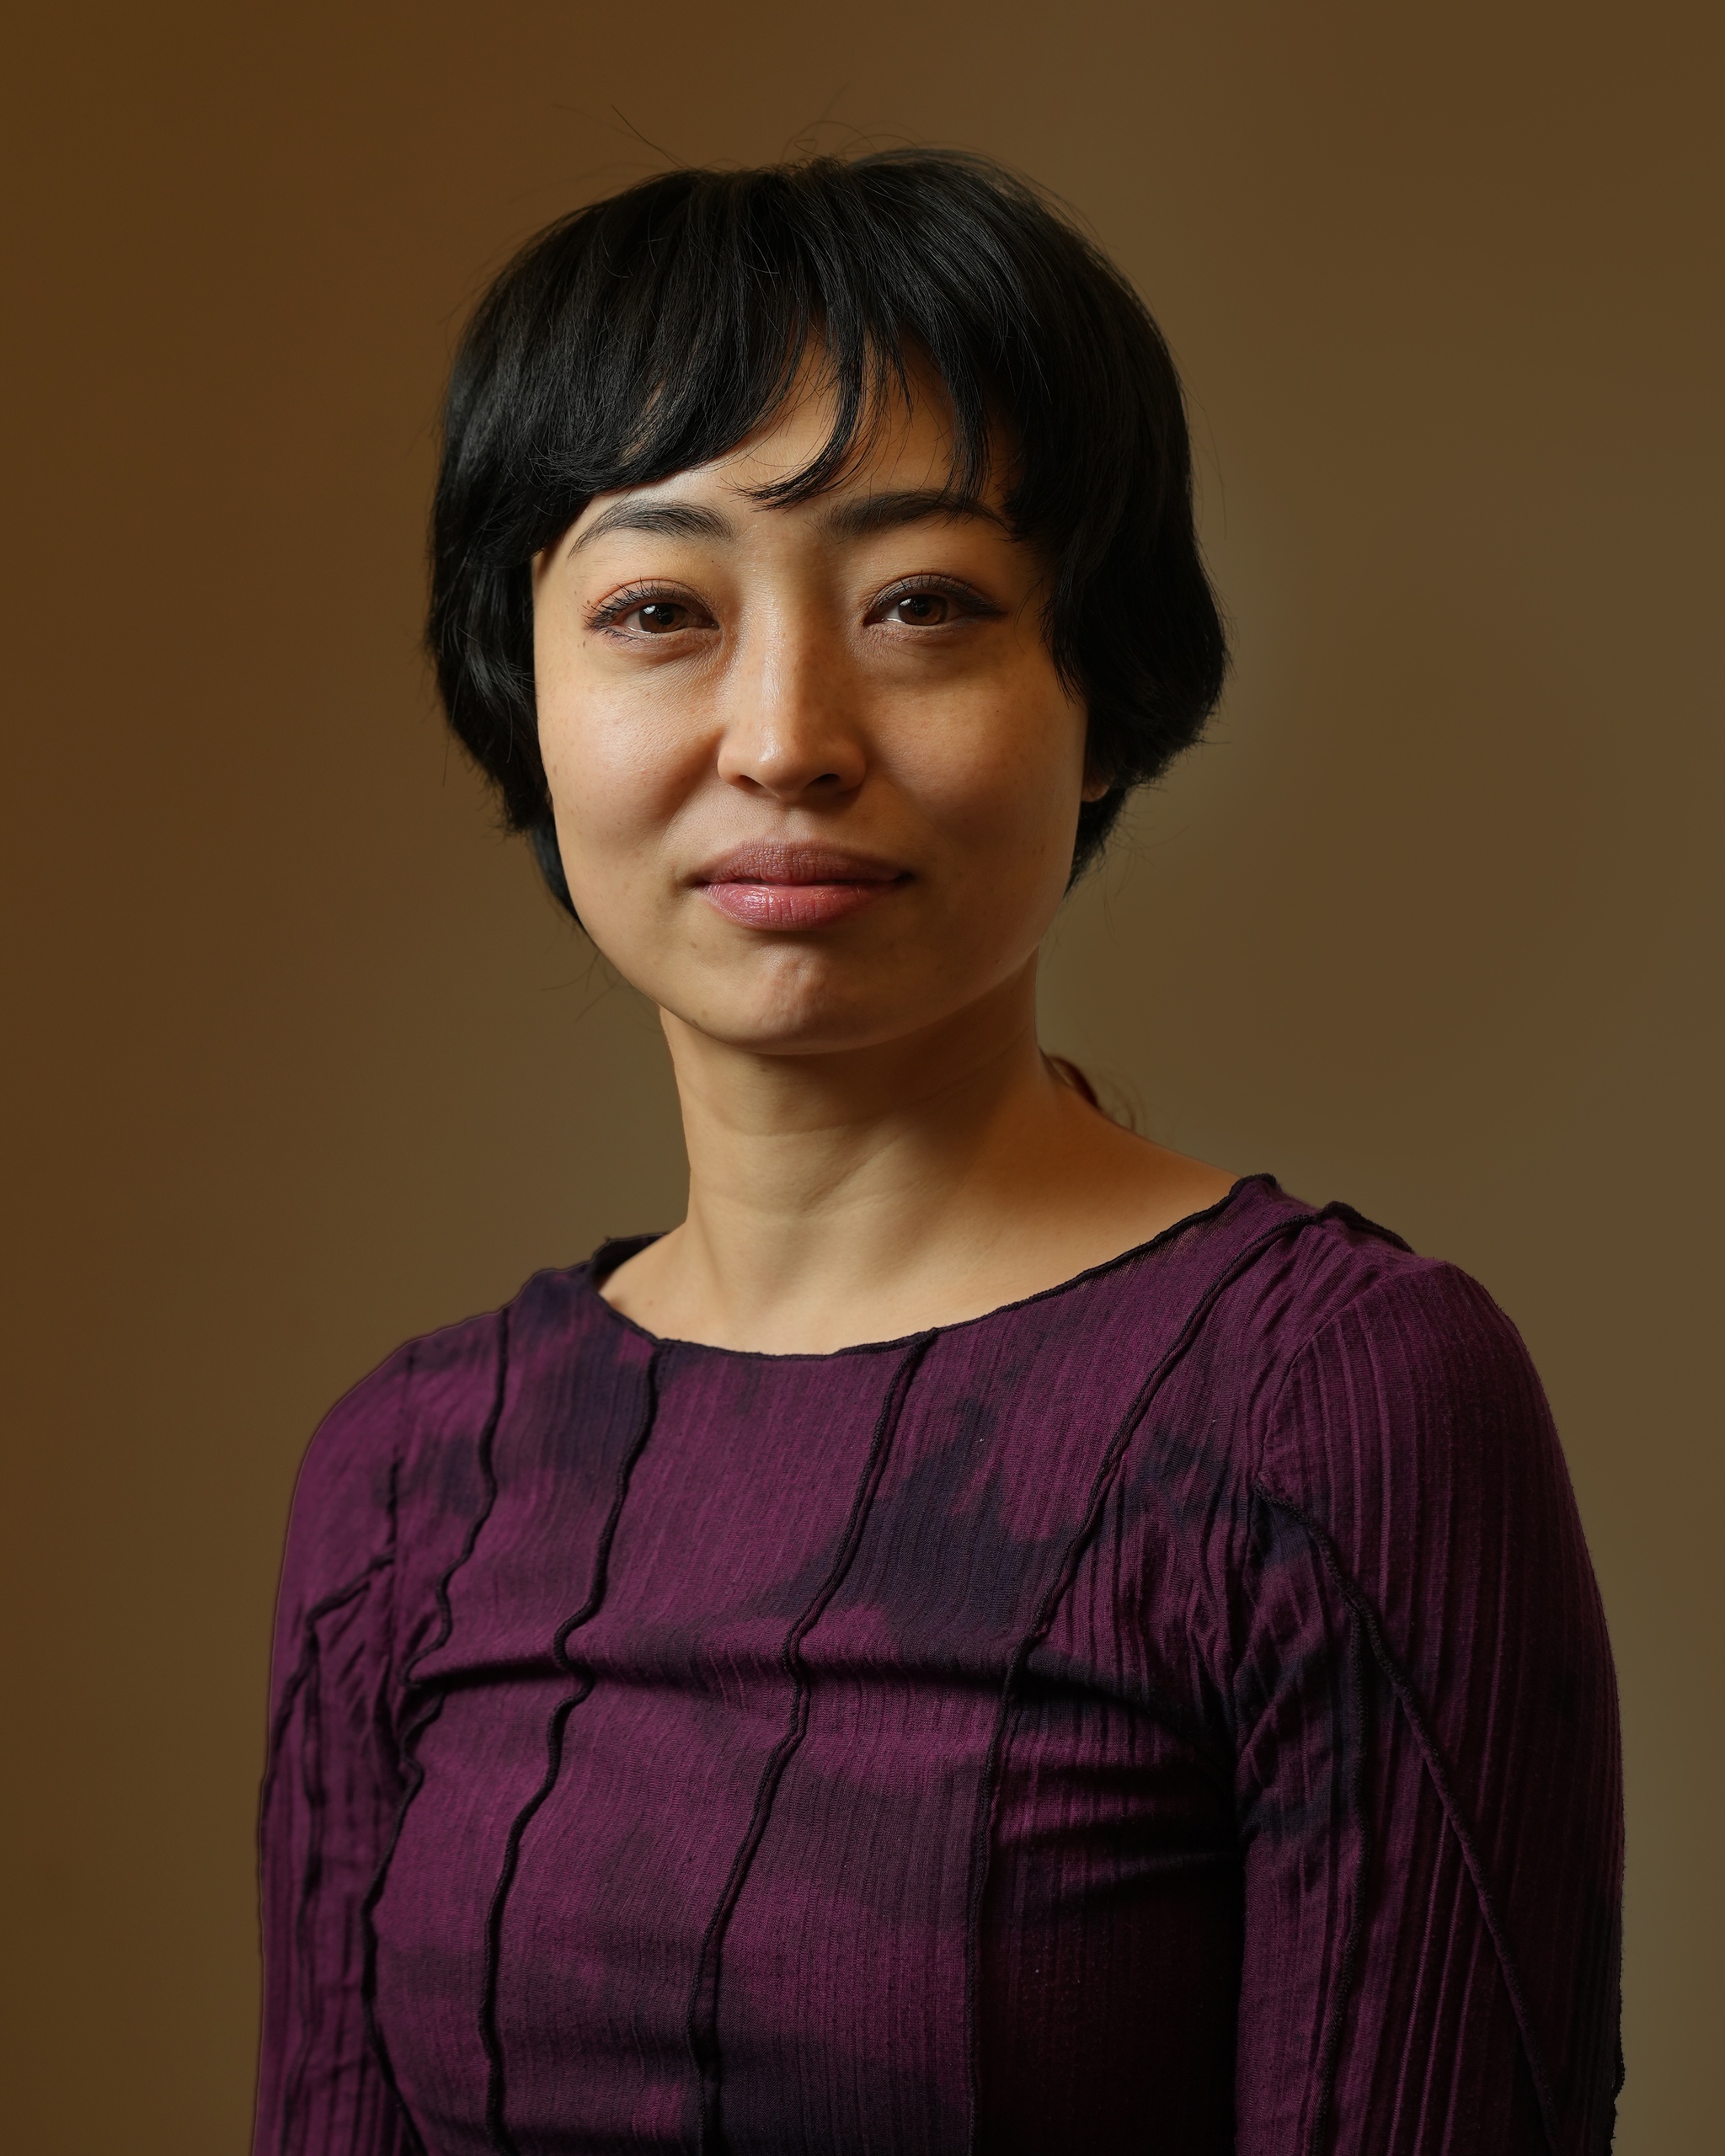 A portrait of Yukari Osaka against a neutral brown background. Yukari wears a dark purple shirt and looks directly at us with a closed-mouth smile. 